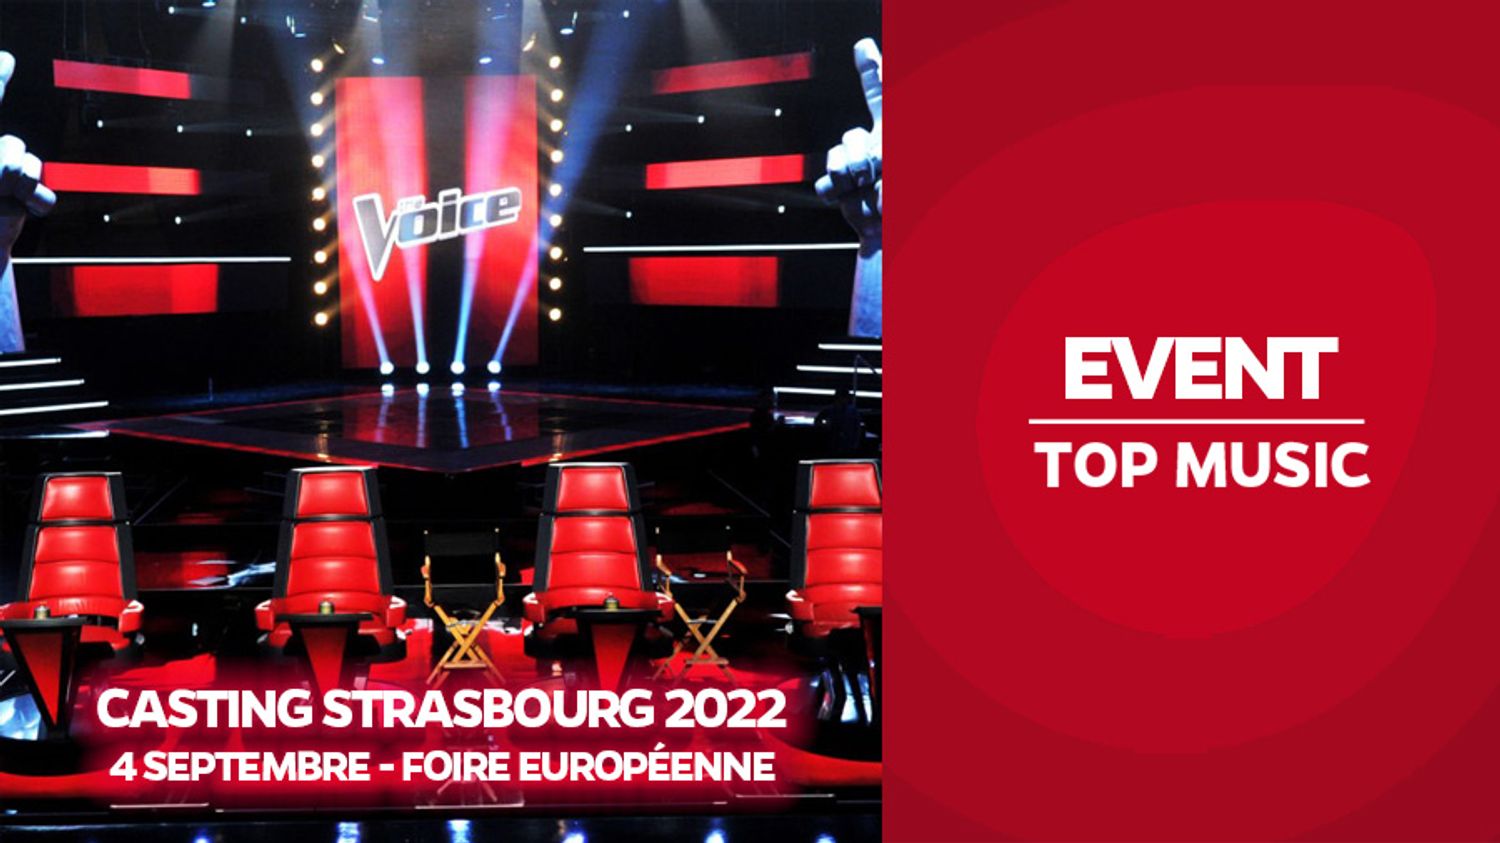 THE VOICE CASTING TOP MUSIC 2022